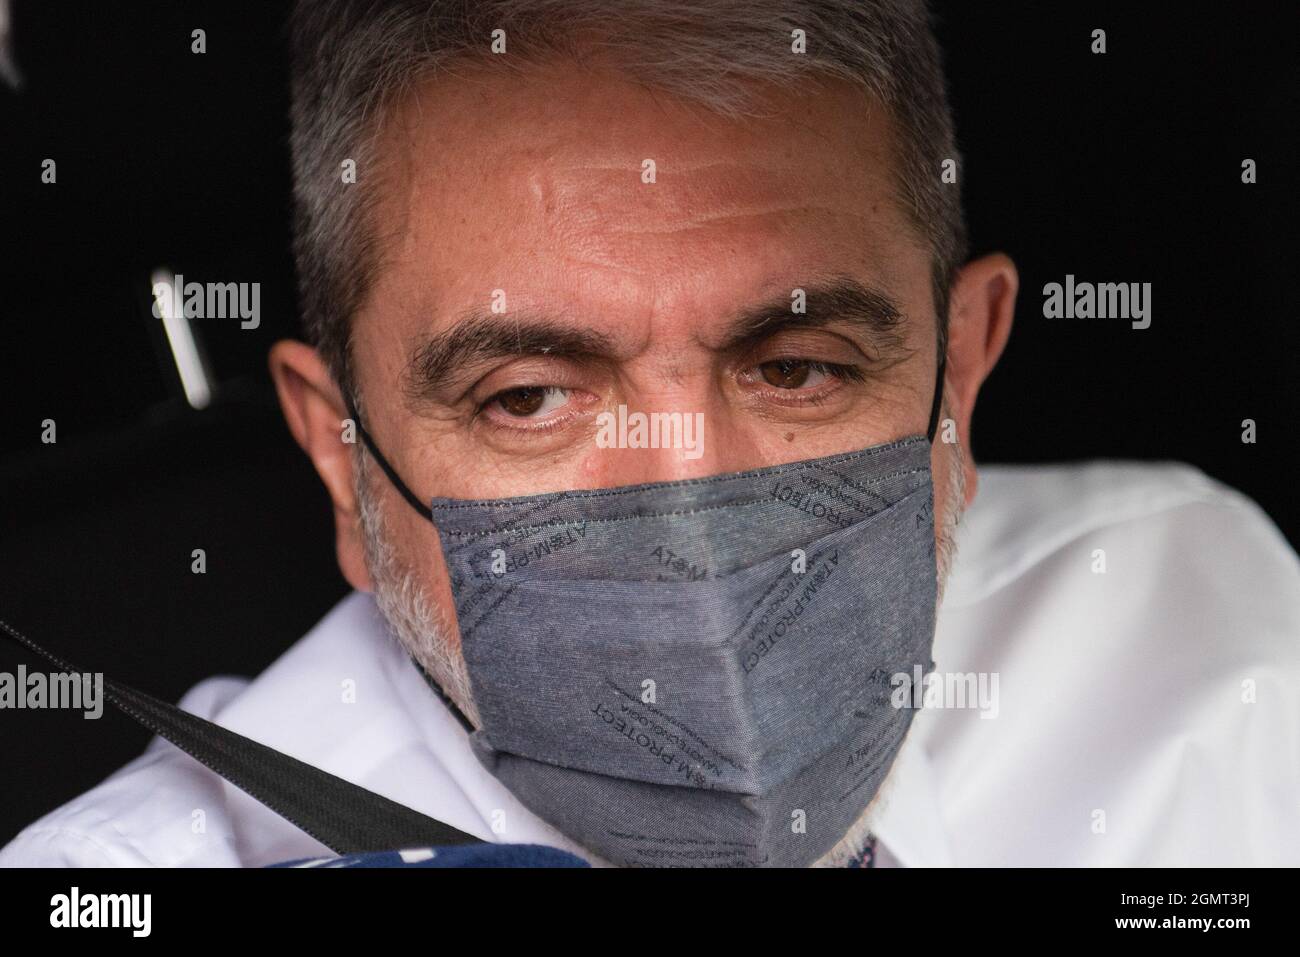 Buenos Aires, Argentina. 12th Feb, 2015. Argentina's Security minister Anibal Fernandez speaks to the press after taking an oath. After the Political Crisis of the Government of Alberto Fernandez in Argentina, ministers and officials were present at the swearing-in of the new Ministers held at the Government House in Buenos Aires, Argentina. Credit: SOPA Images Limited/Alamy Live News Stock Photo